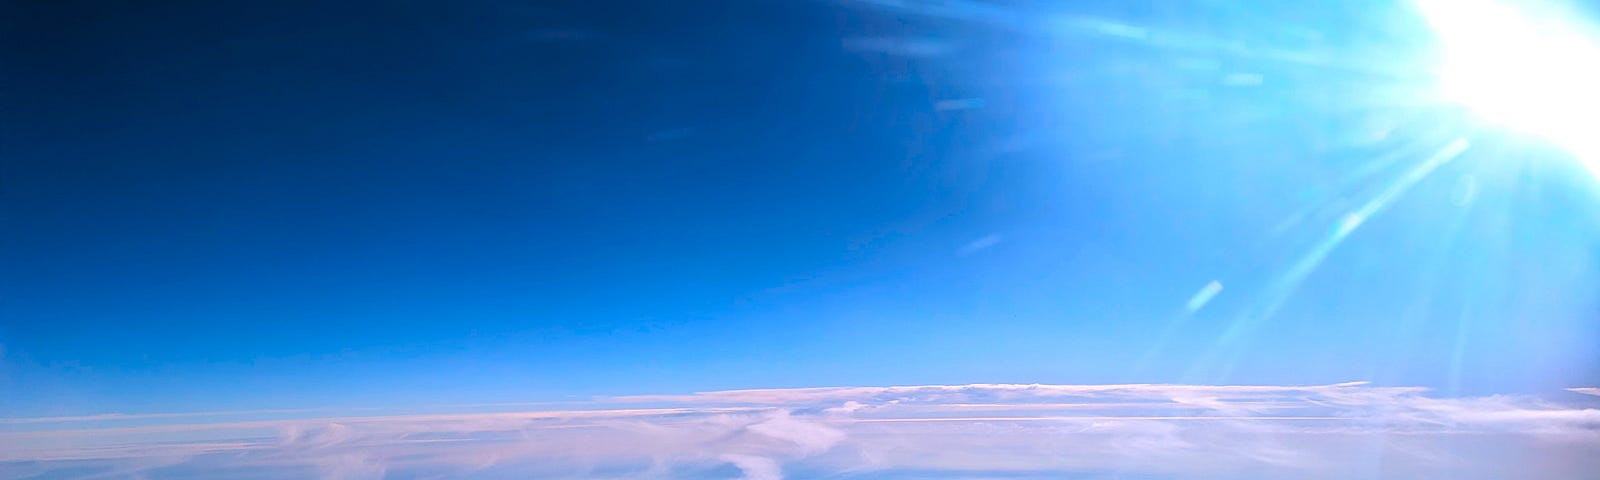 This shows a blue sky above white clouds with the sun off to the right. It was taken from an airplane window.